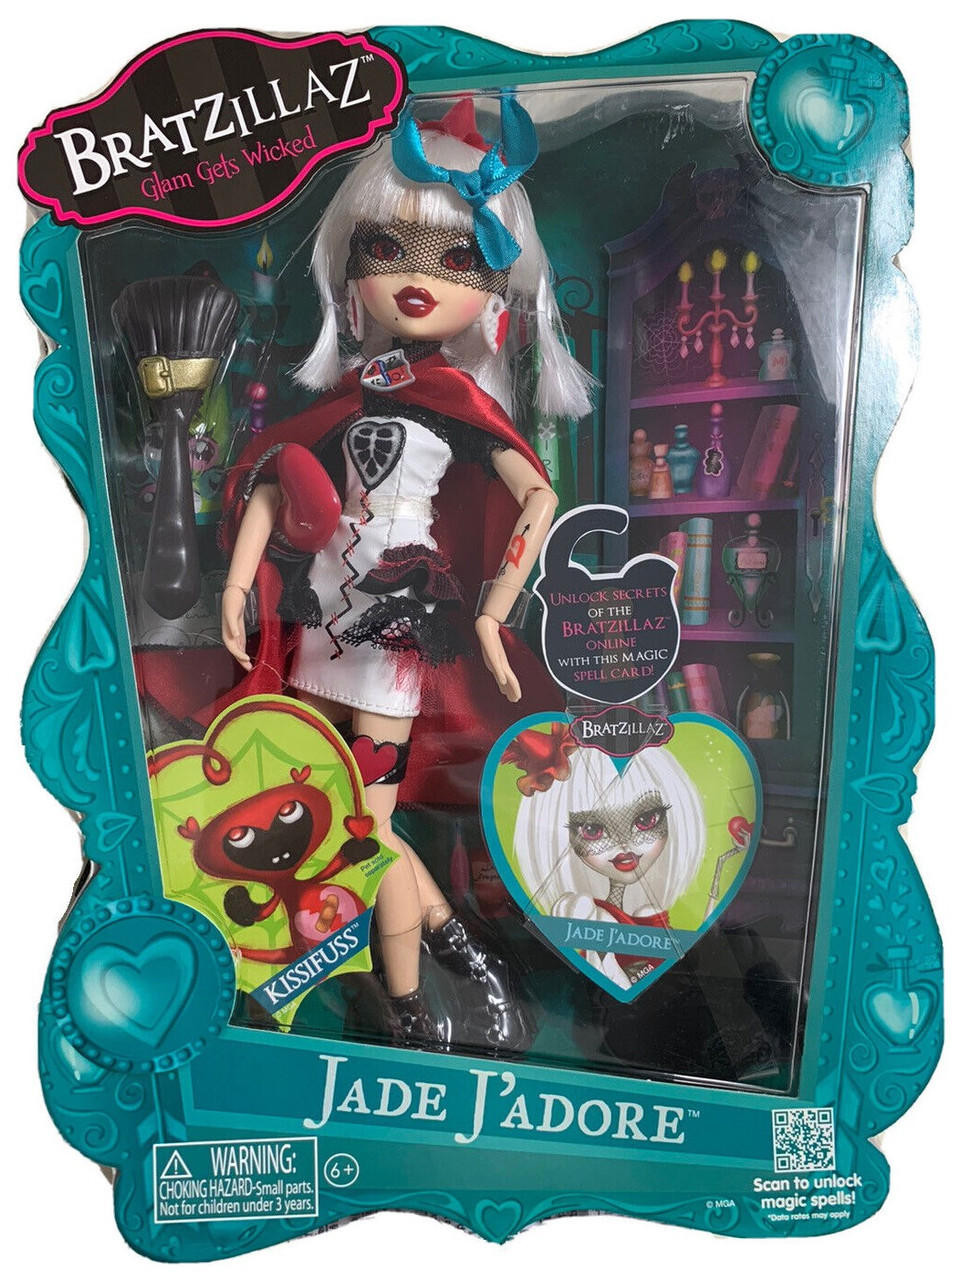 NataliezWorld: Glam gets wicked with Bratzillaz's Jade J'Adore Review